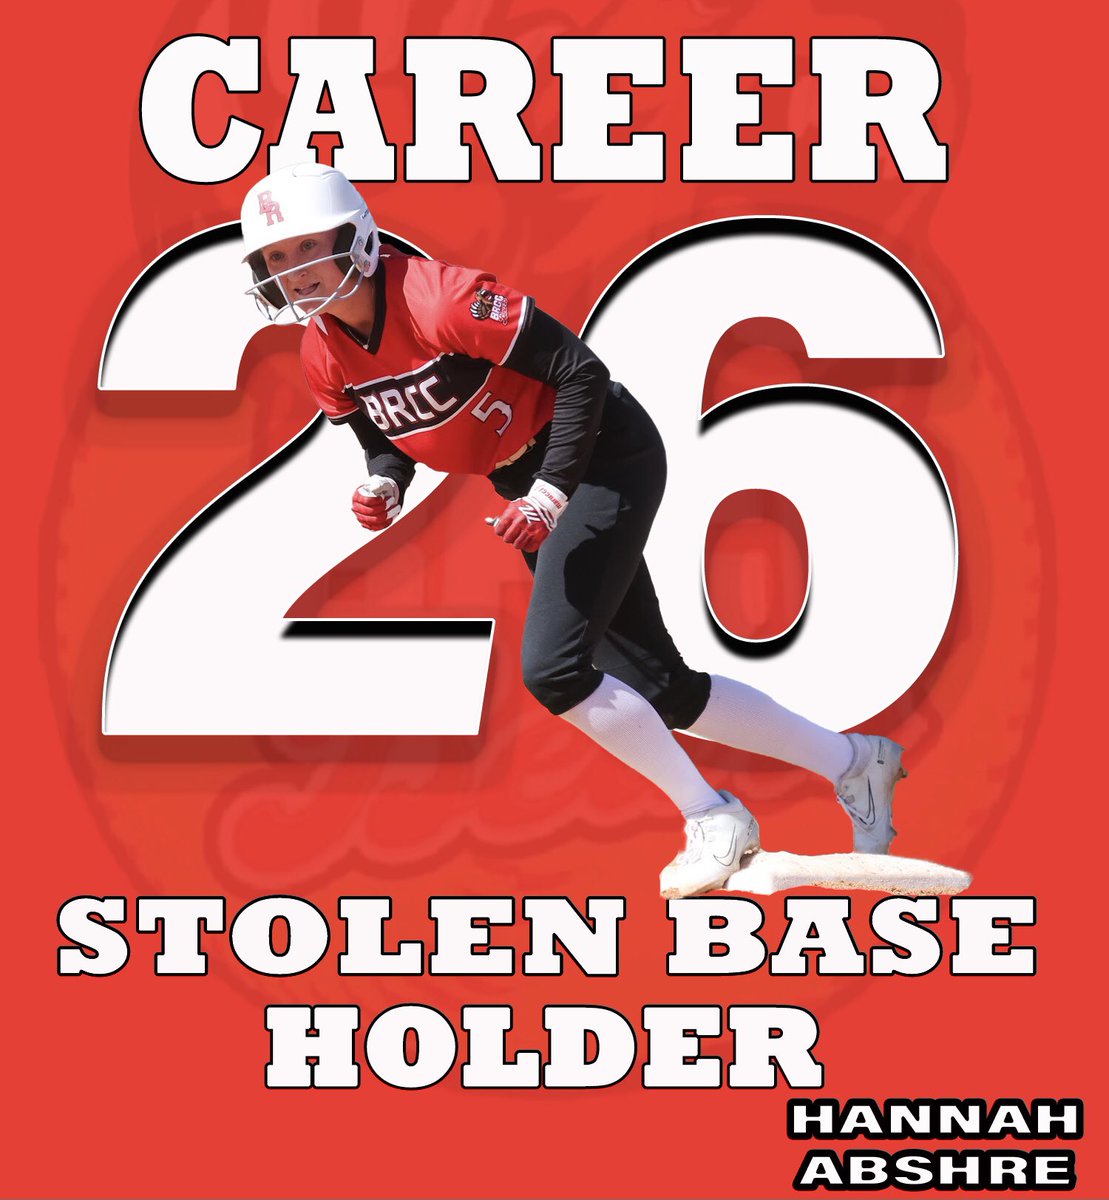 With her stolen base today, in the Bears game one victory over the Coastal Alabama North Coyotes, Hannah Abshire is now the New BRCC Career Stolen Base leader with 26 stolen bases in her Bears Softball Career. Hannah breaks the record that was held by Morgan Alleman with 25.